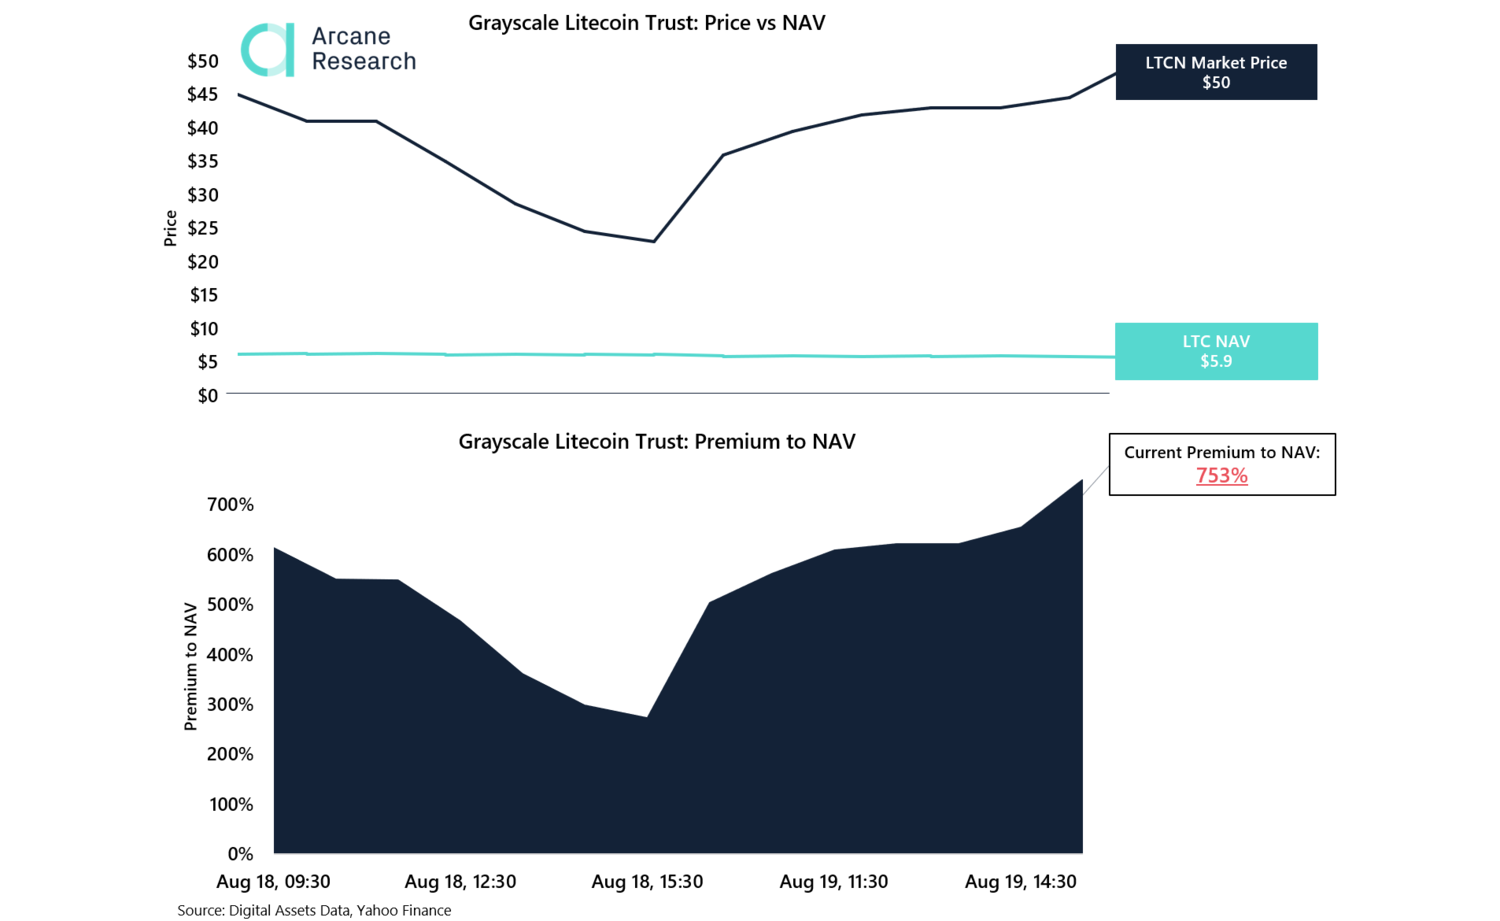 The Grayscale Litecoin Trust